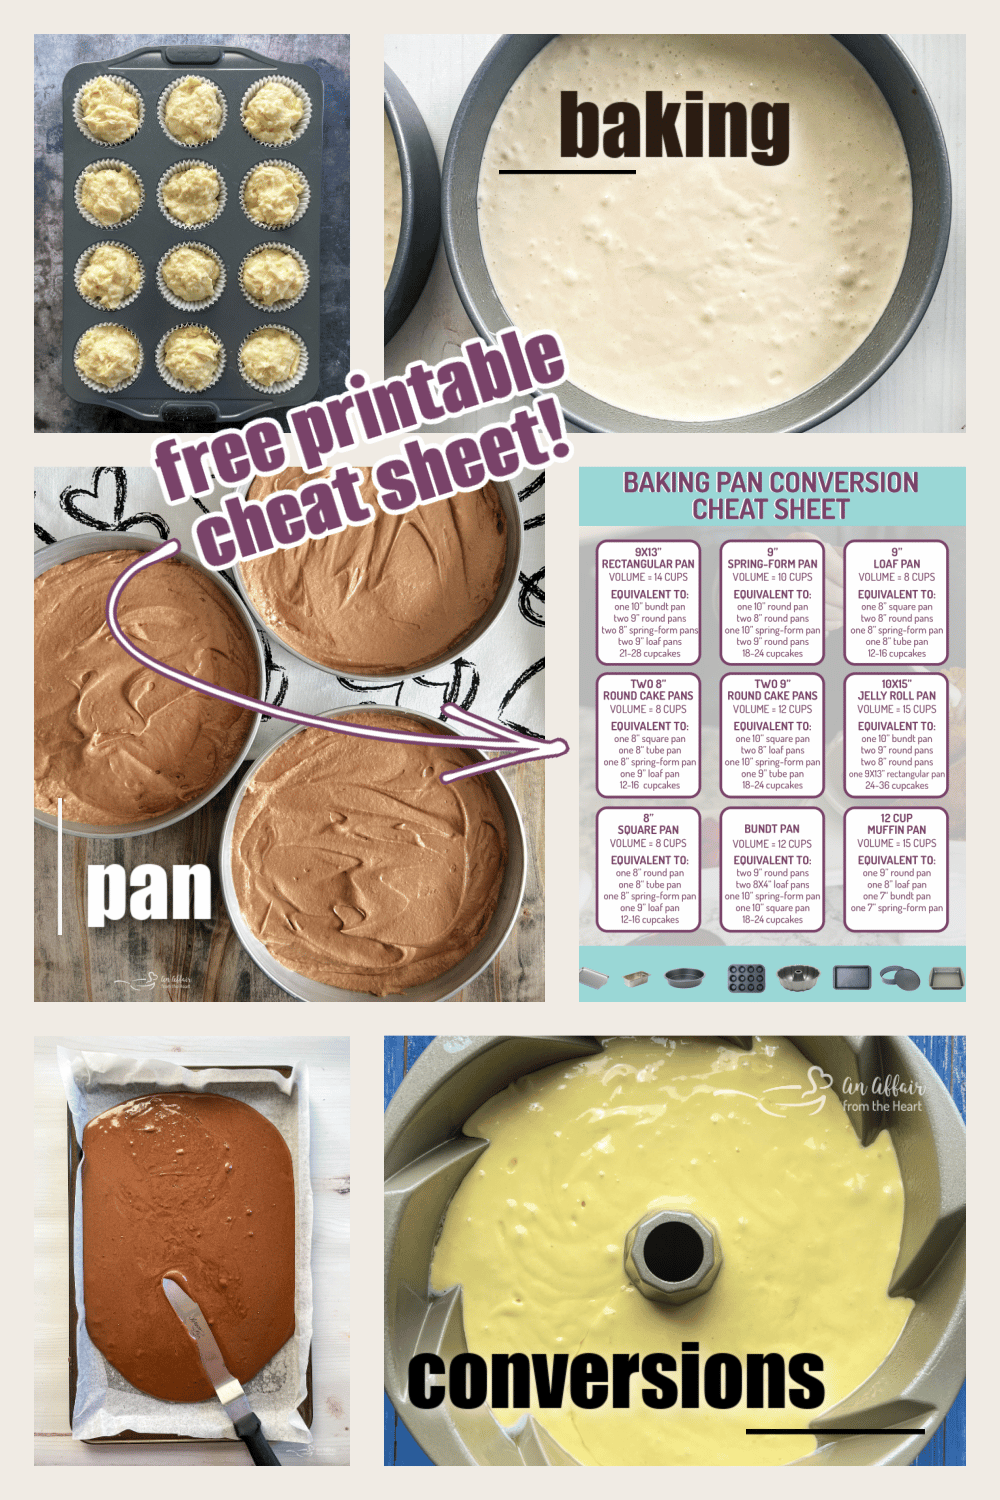 https://anaffairfromtheheart.com/wp-content/uploads/2022/06/Baking-Pan-Conversions-_-An-Affair-from-the-Heart-.png